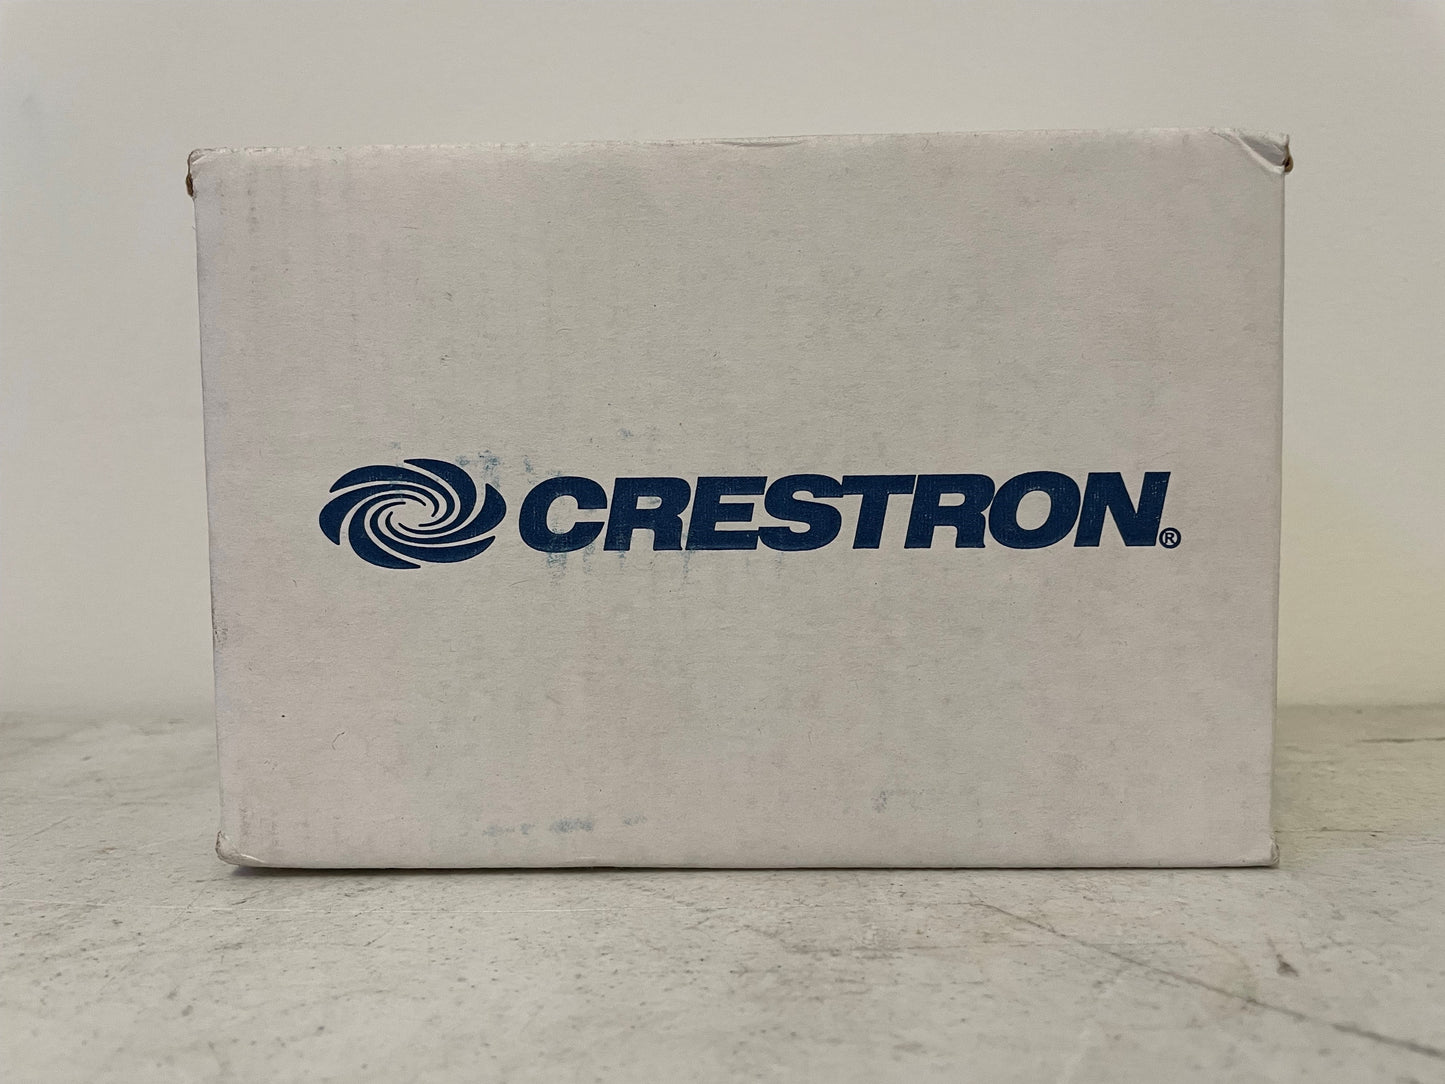 New Crestron DM-TX-4K-100-C-1G-B-T Wall Plate 4K, Lot of 3 for Sale. We Sell Professional Audio Equipment. Audio Systems, Amplifiers, Consoles, Mixers, Electronics, Entertainment and Live Sound.